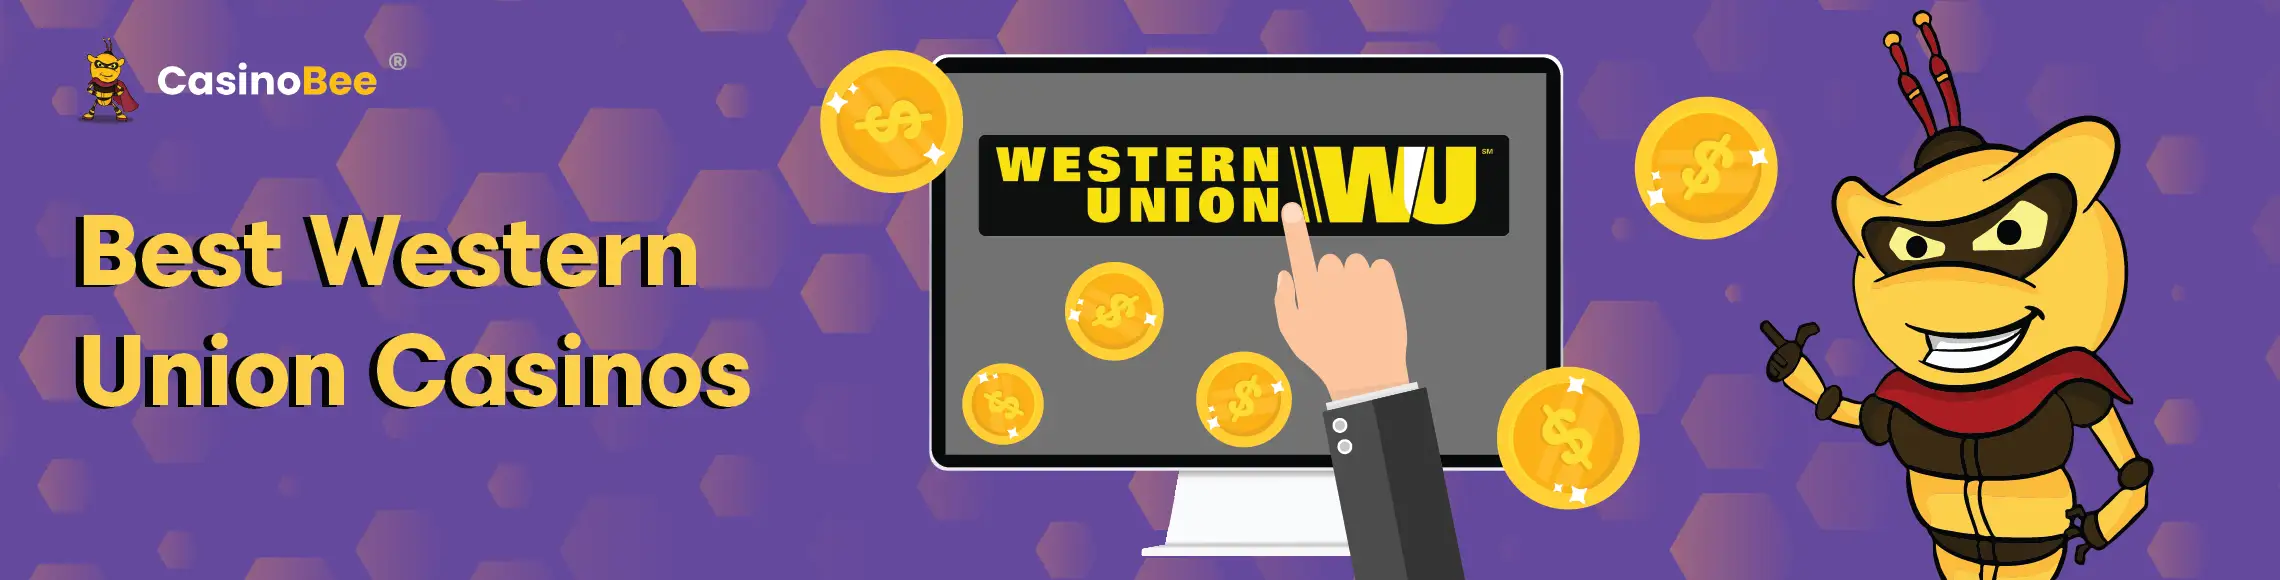 Western Union Casinos in iGaming